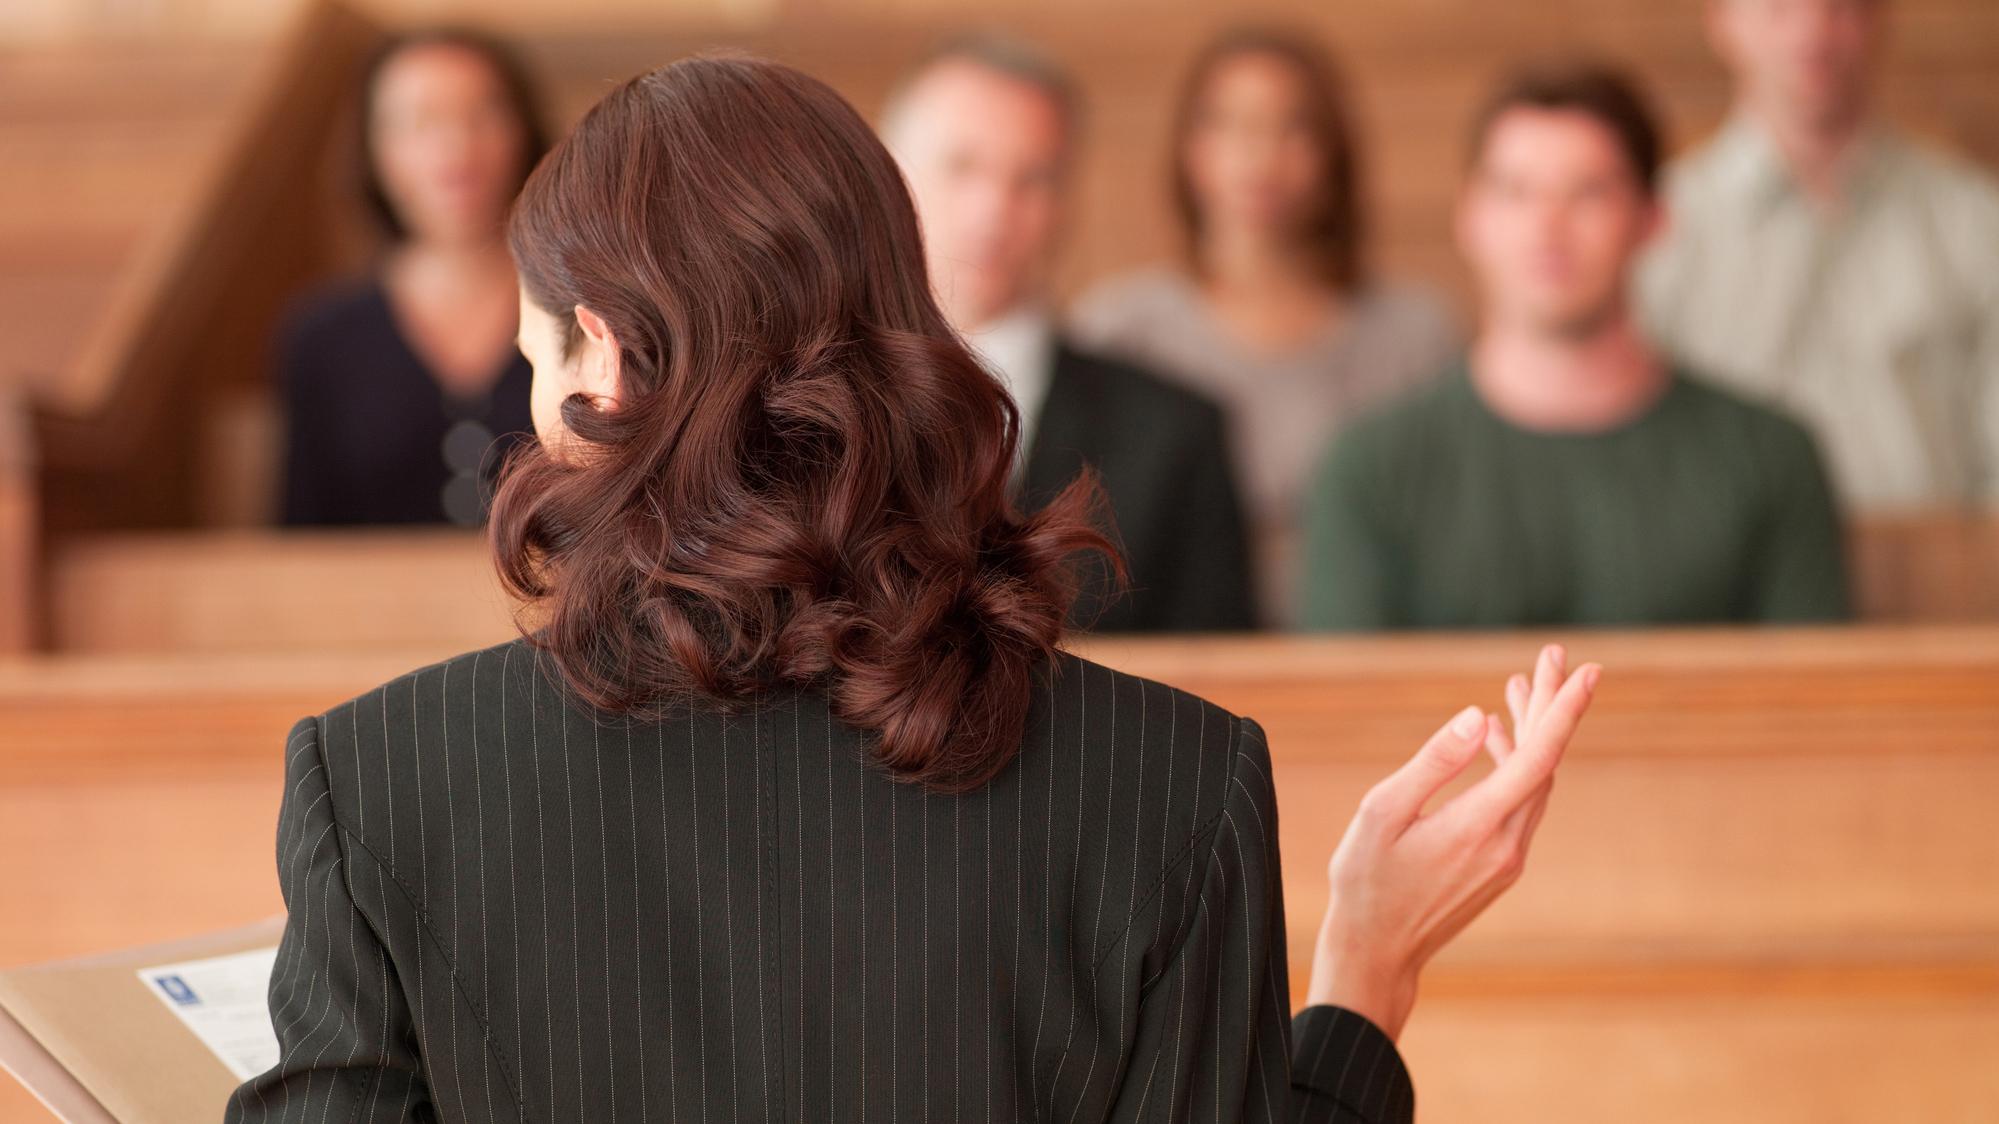 Inside the Courtroom: A Look at the Legal System in Action